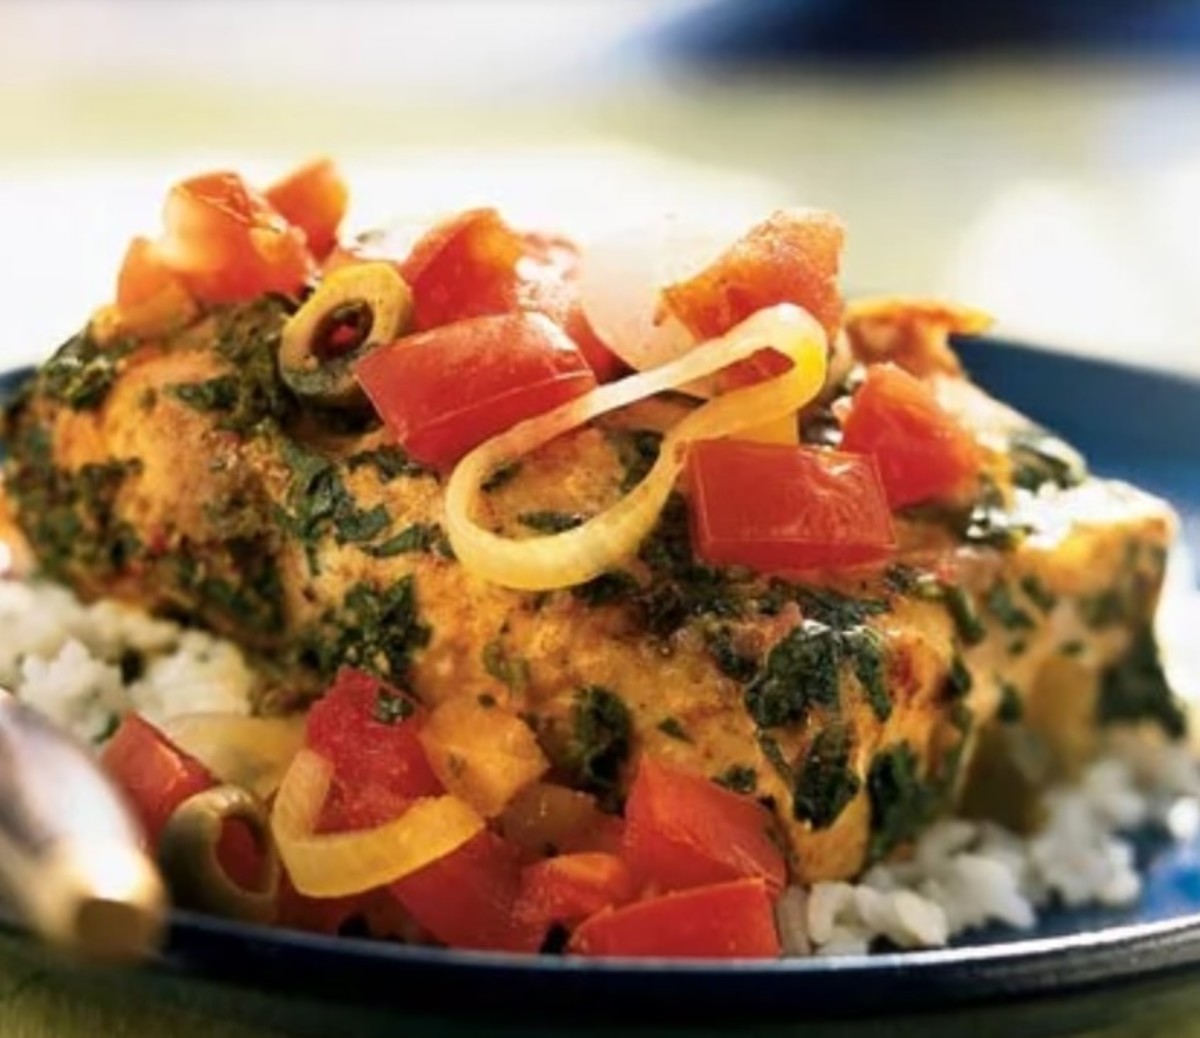 Fish tagine with preserved lemon and tomatoes